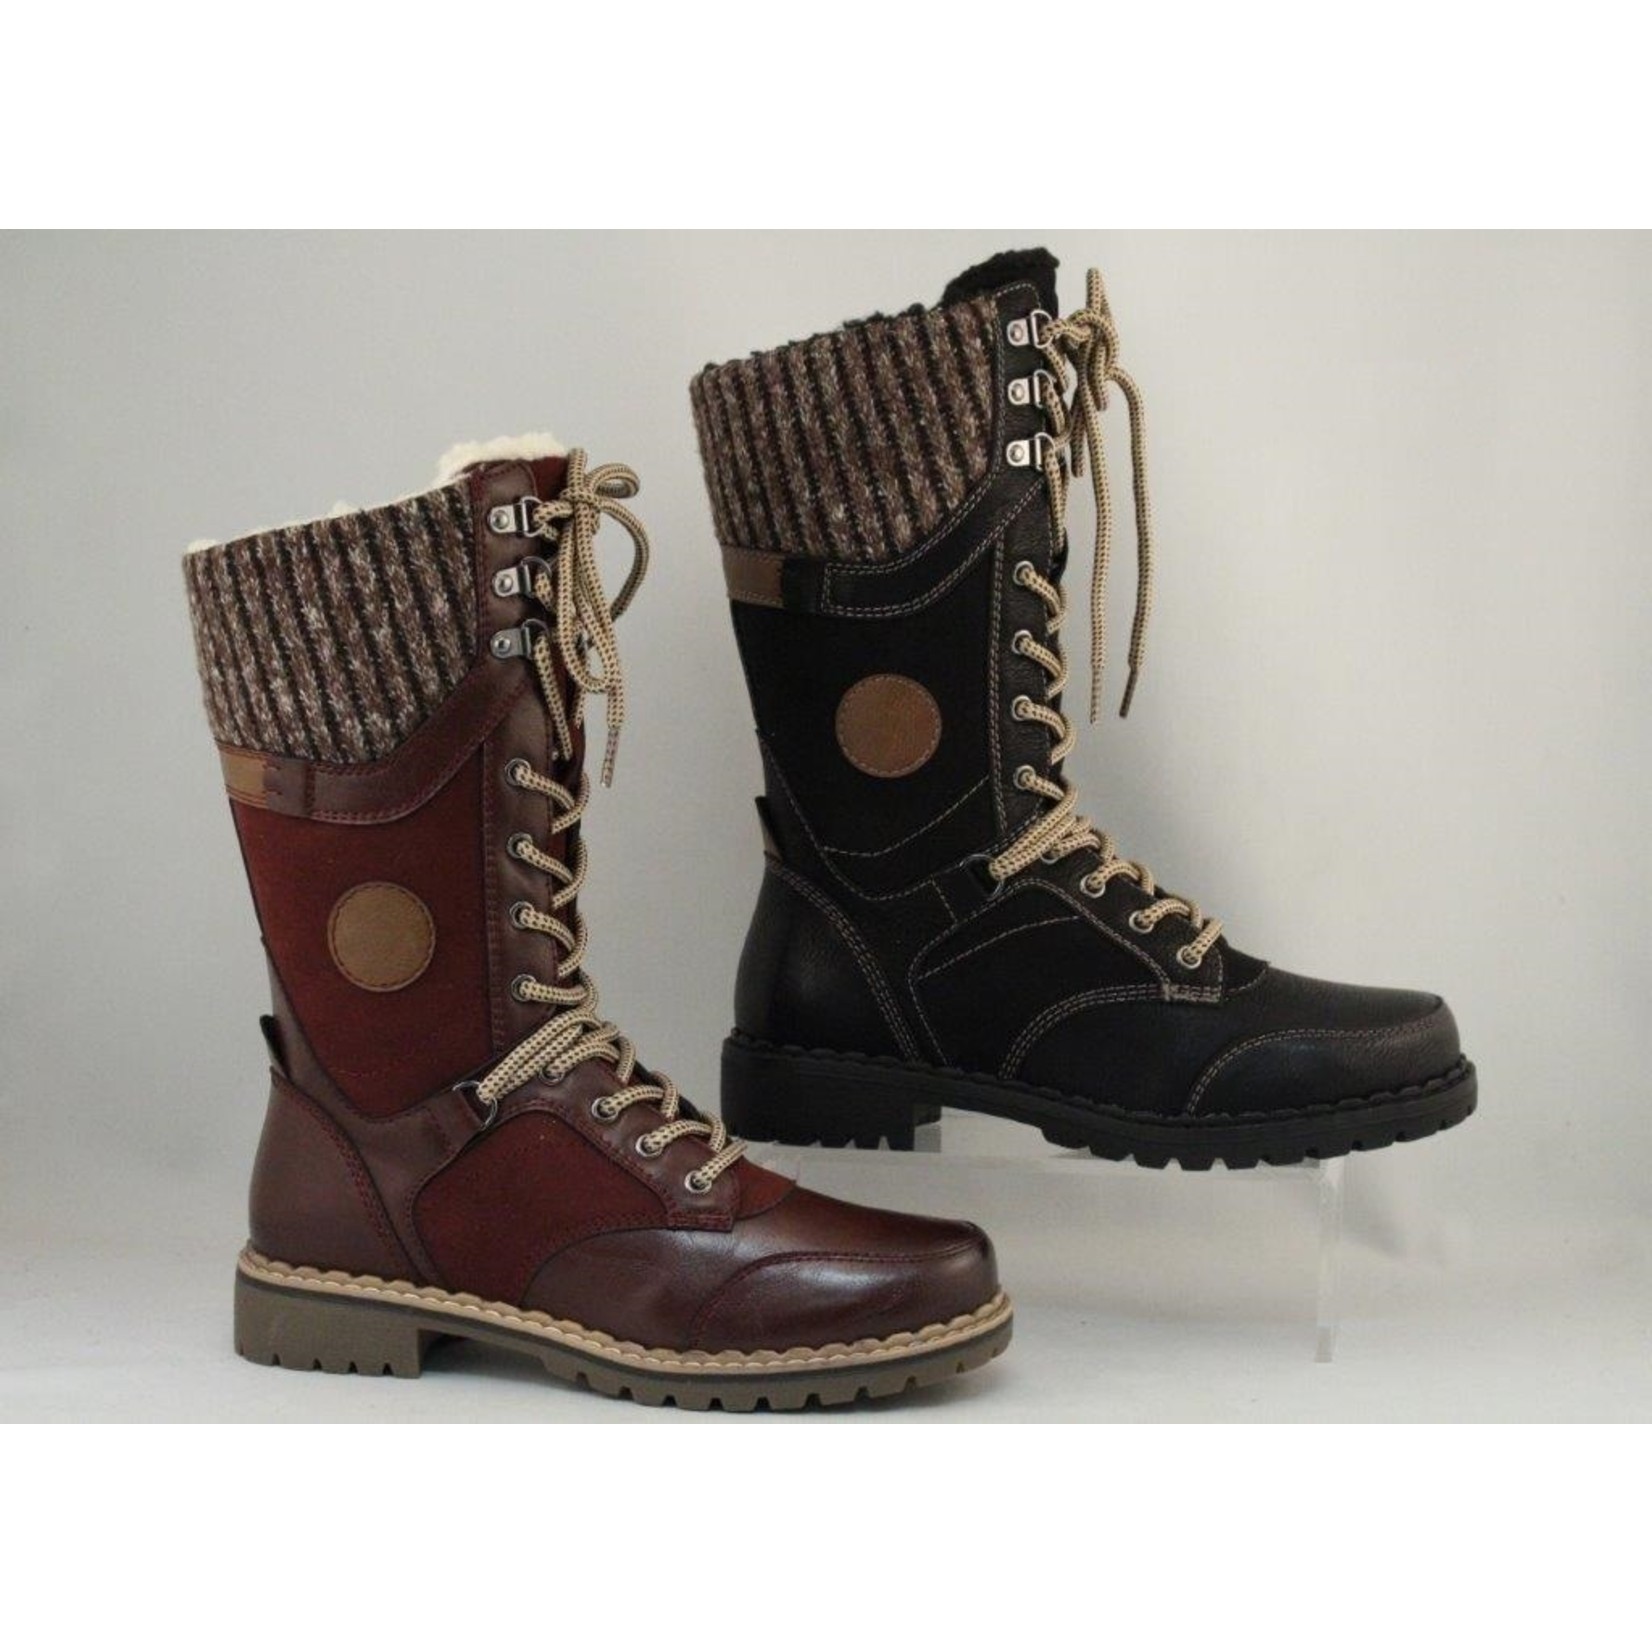 Lace up winter boot with side zip